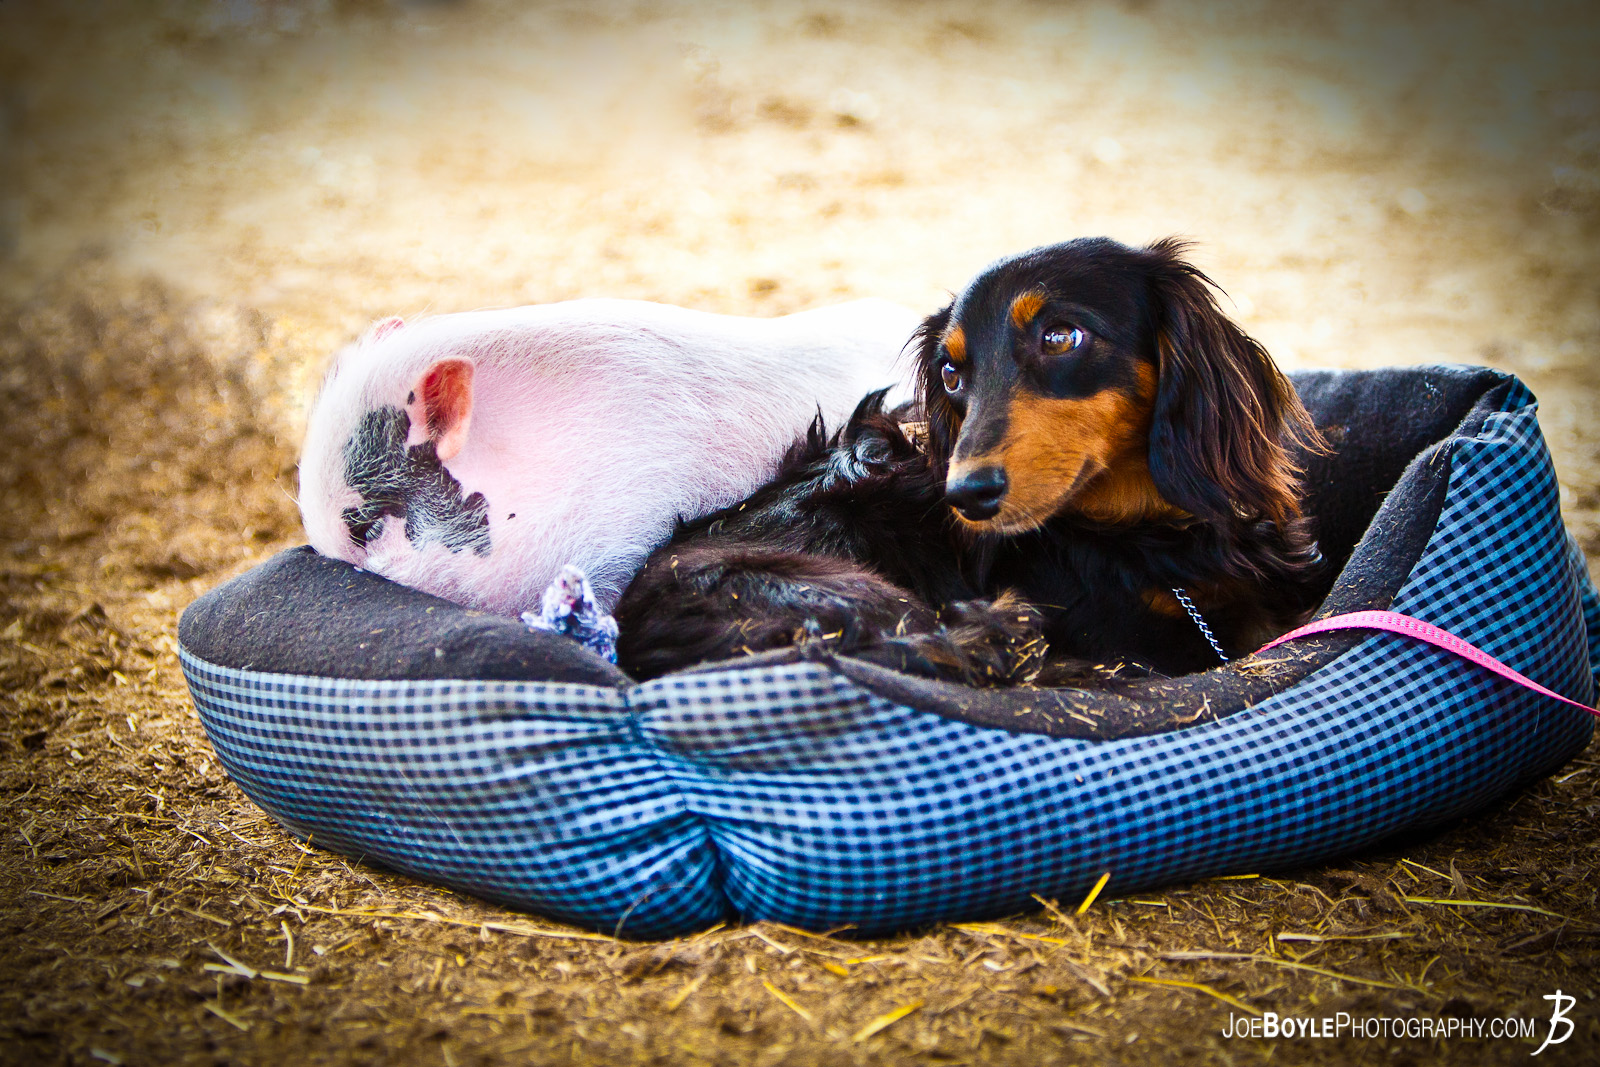   While at a farm I was able to capture a dog and pig lying together! 